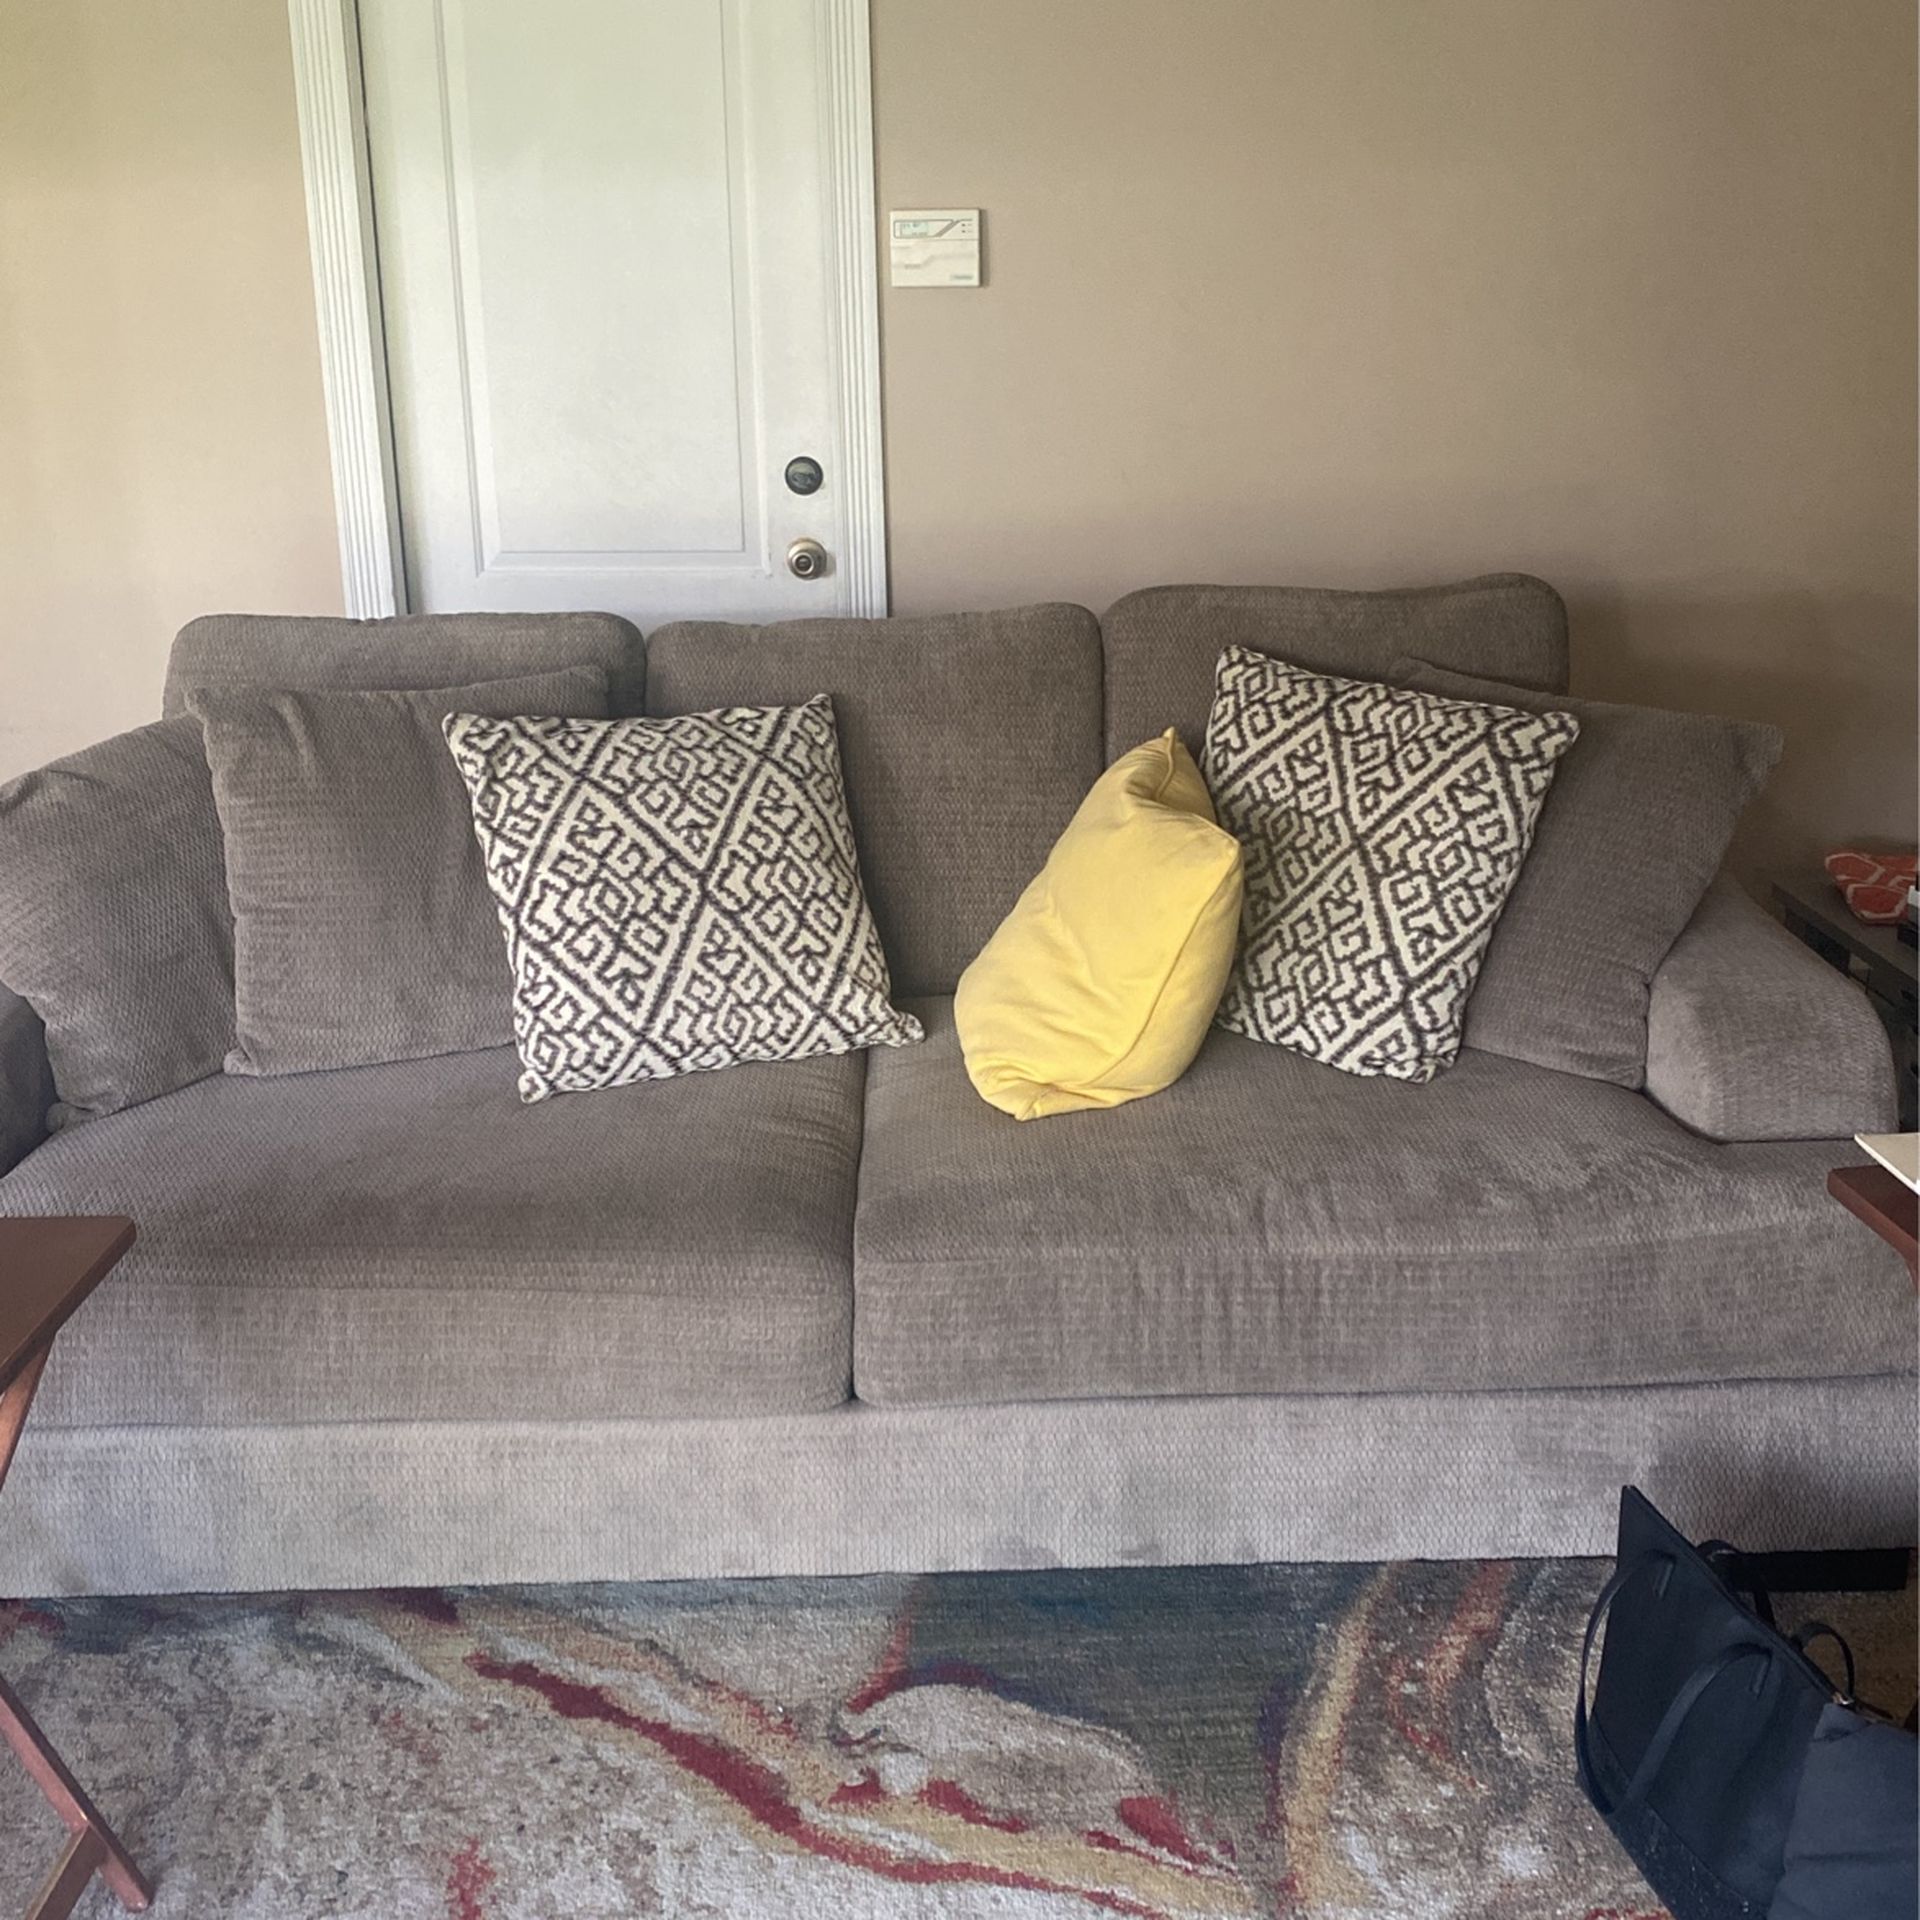 Two Piece Couch Set With All Pillows Included. Good Condition Gray. $100 OBO